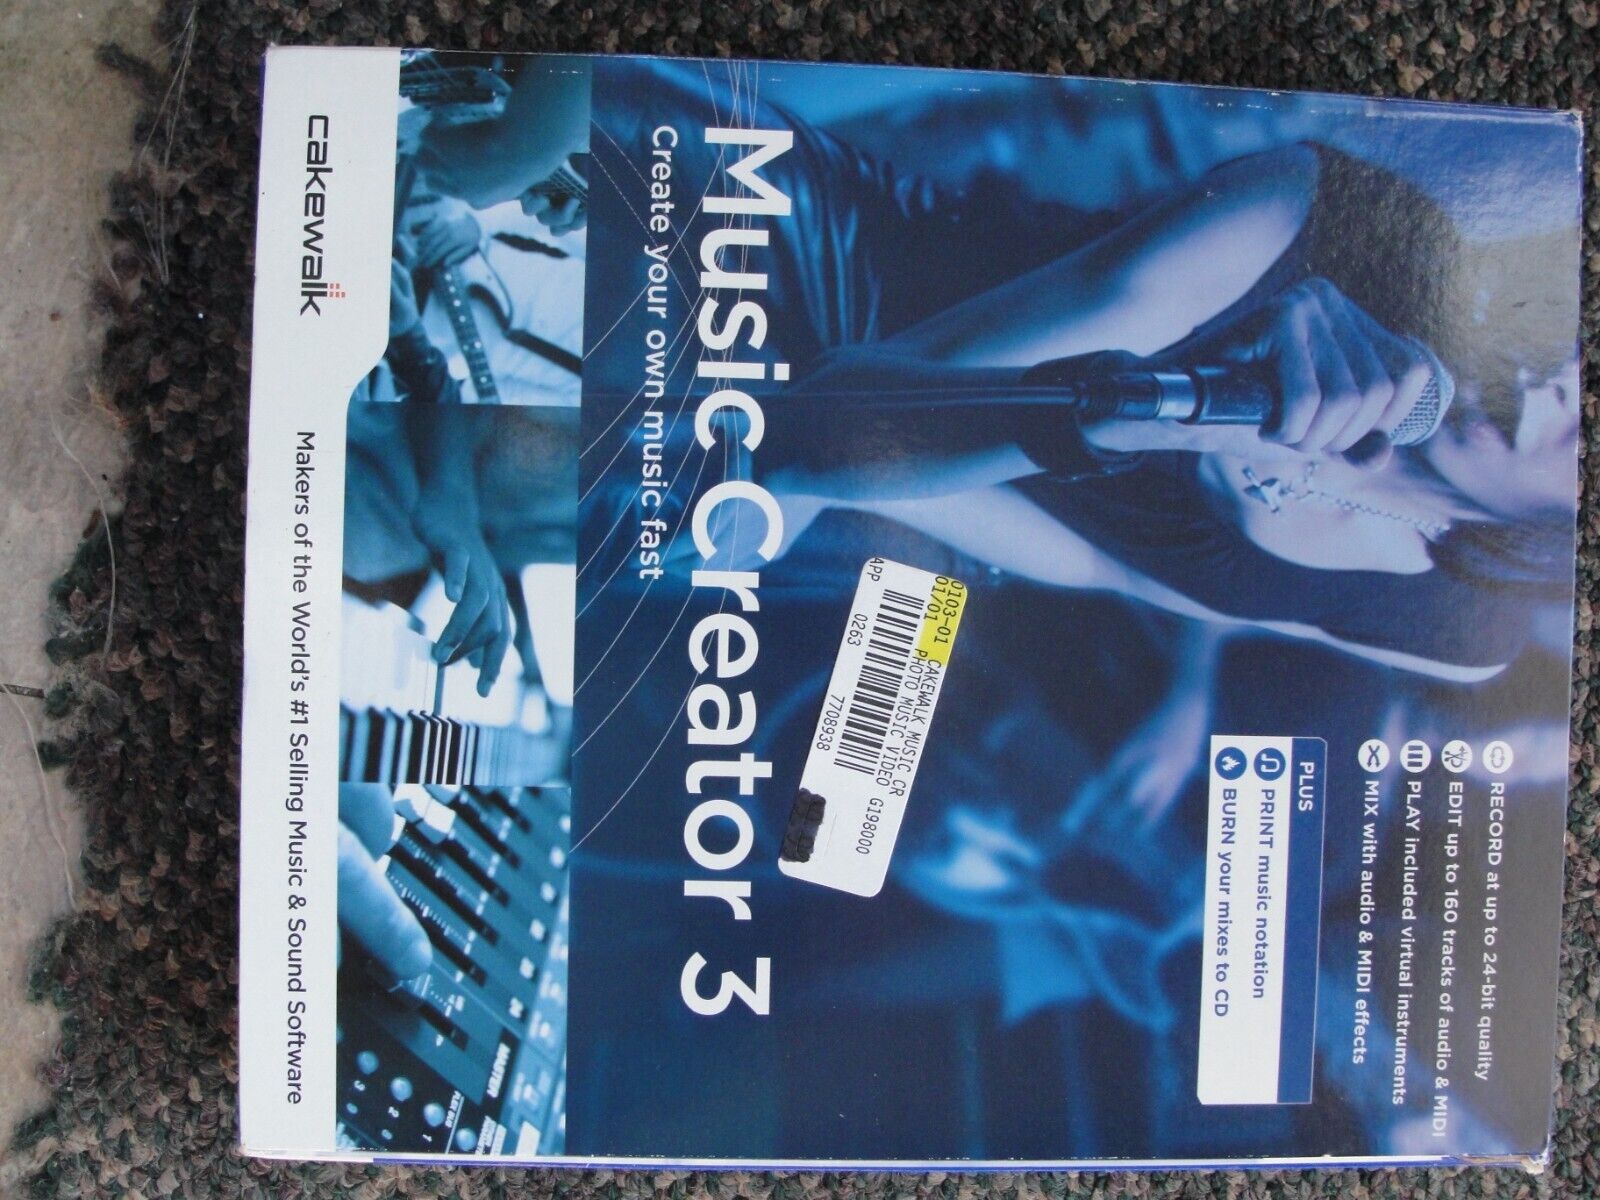 Music Creator 3 By Cakewalk for Windows - New Sealed Box